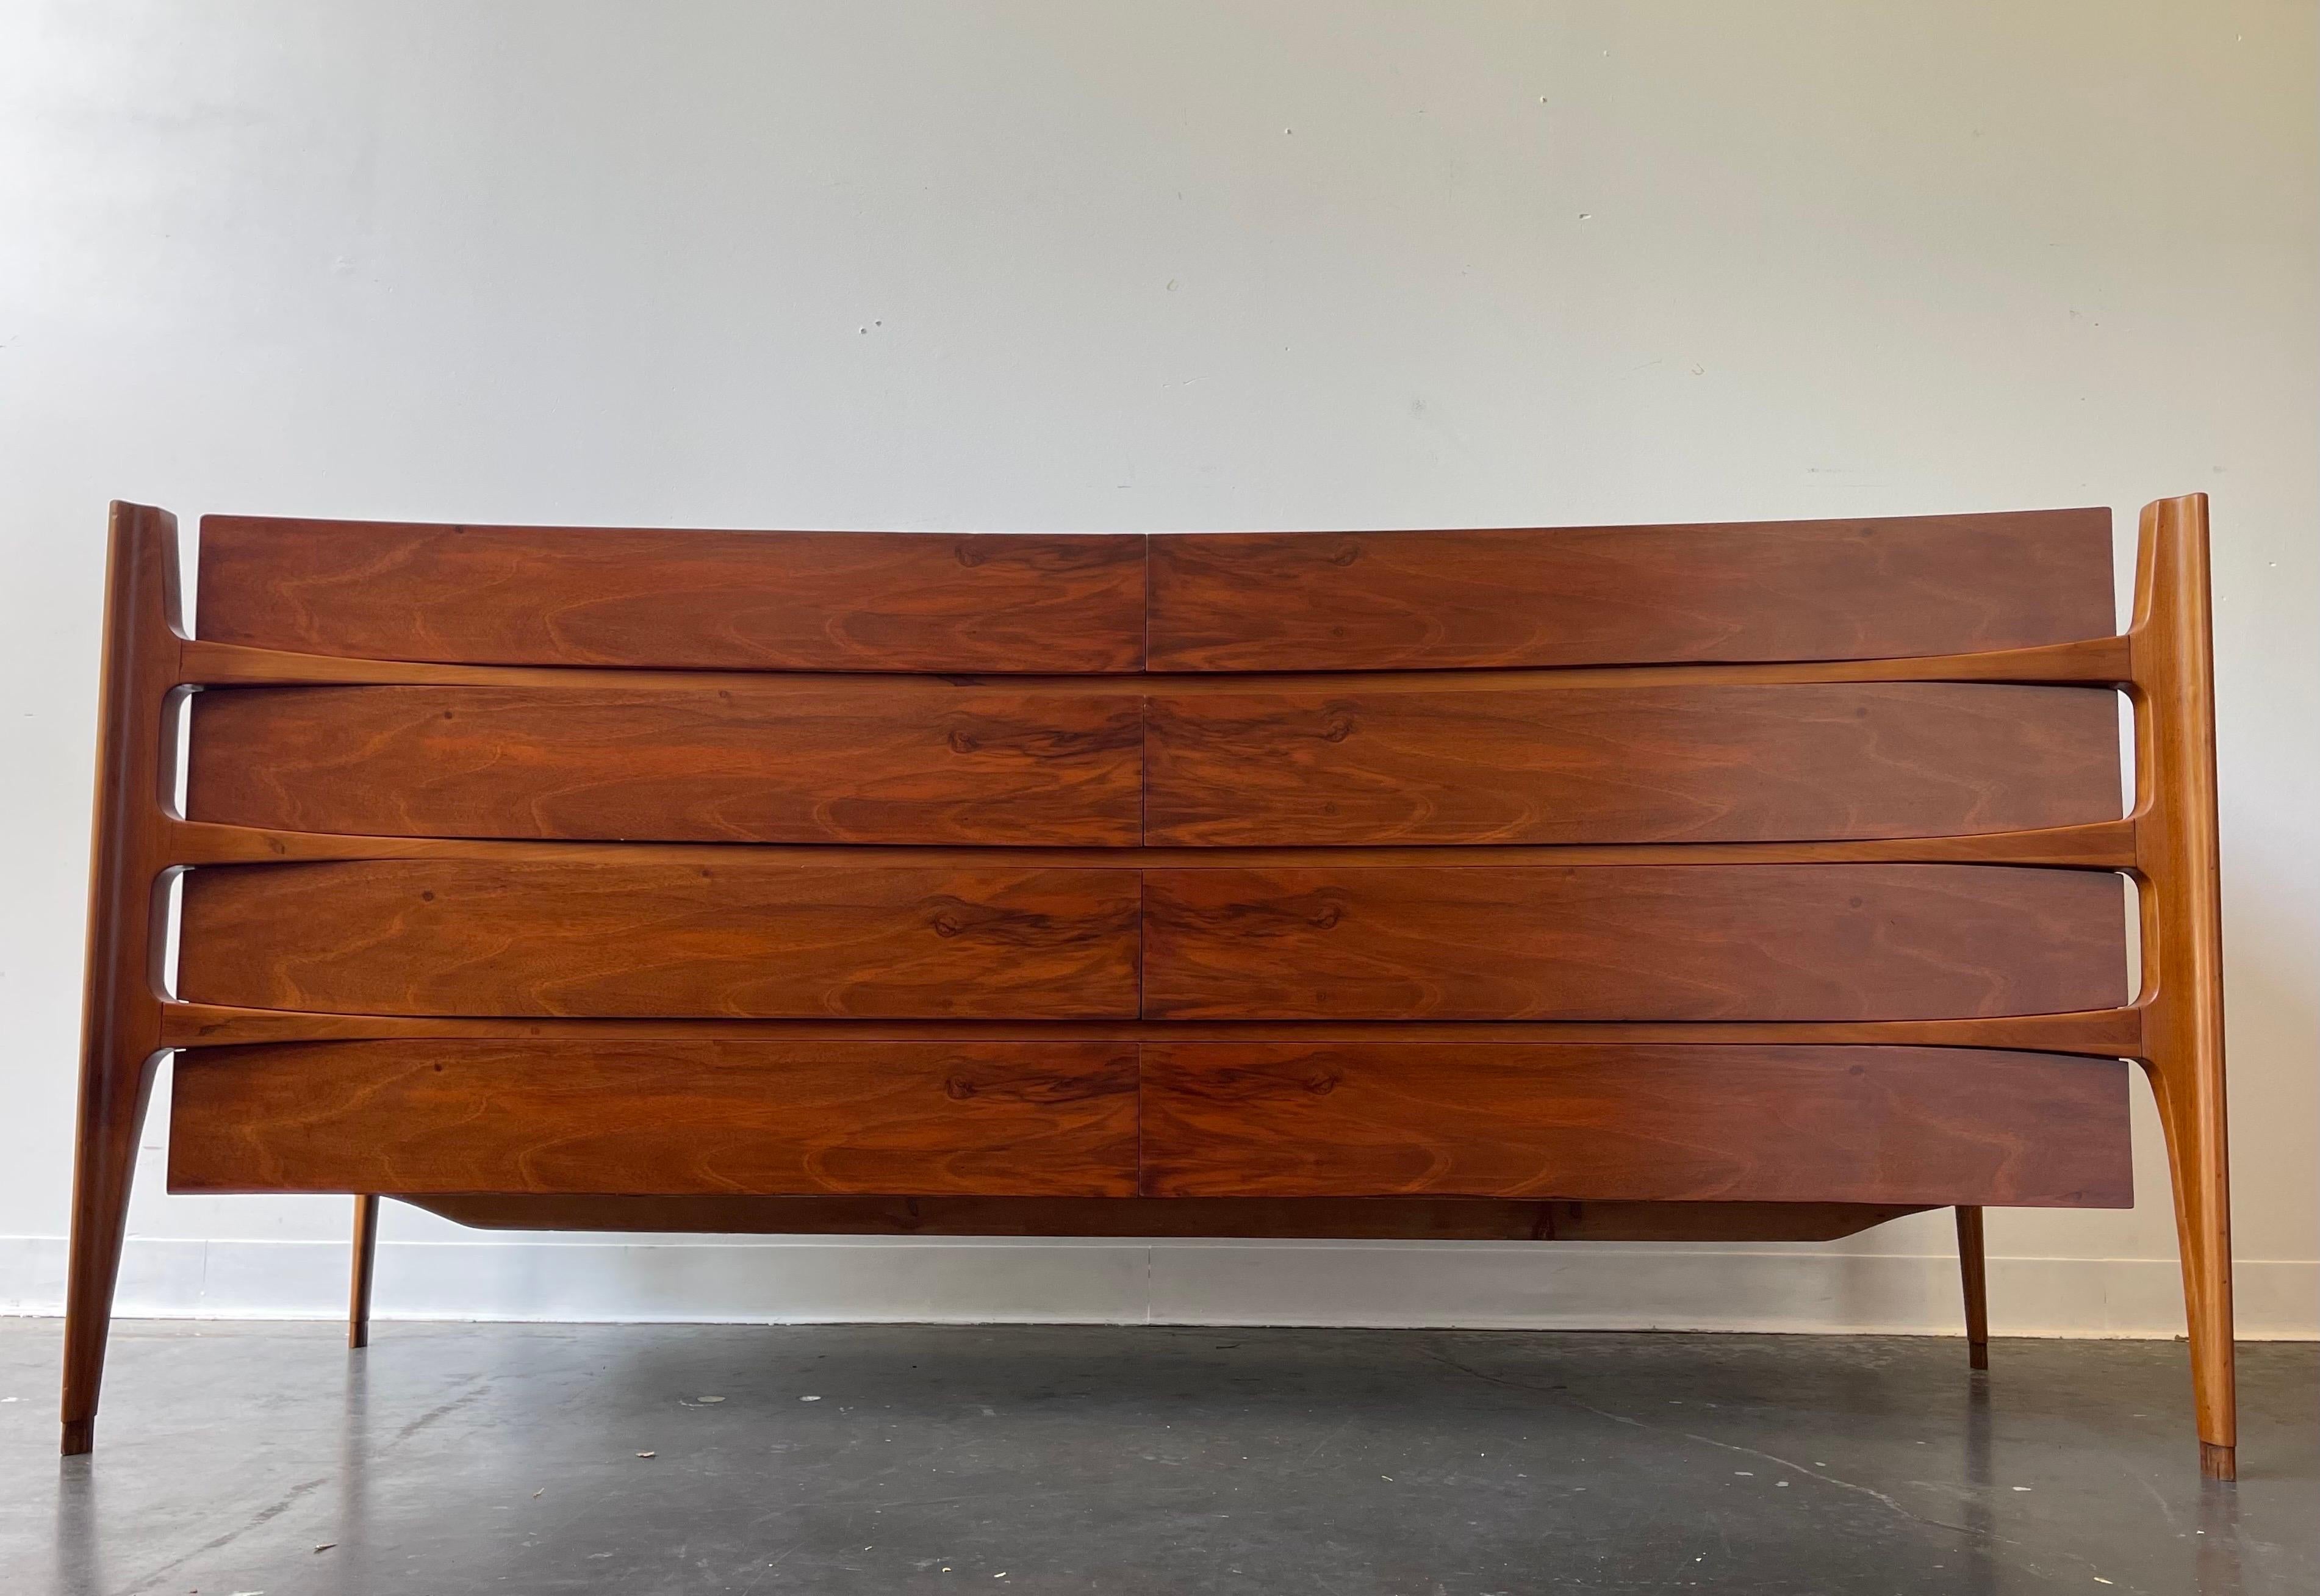 Stunning sculptural lowboy dresser in the style of William Hinn designed by Iorgen Clausen for Brande Mobelfabrik DEnmark circa 1960’s.

This is an exact design as the Hinn dresser but the quality is actually superior in many opinions.

8 drawer